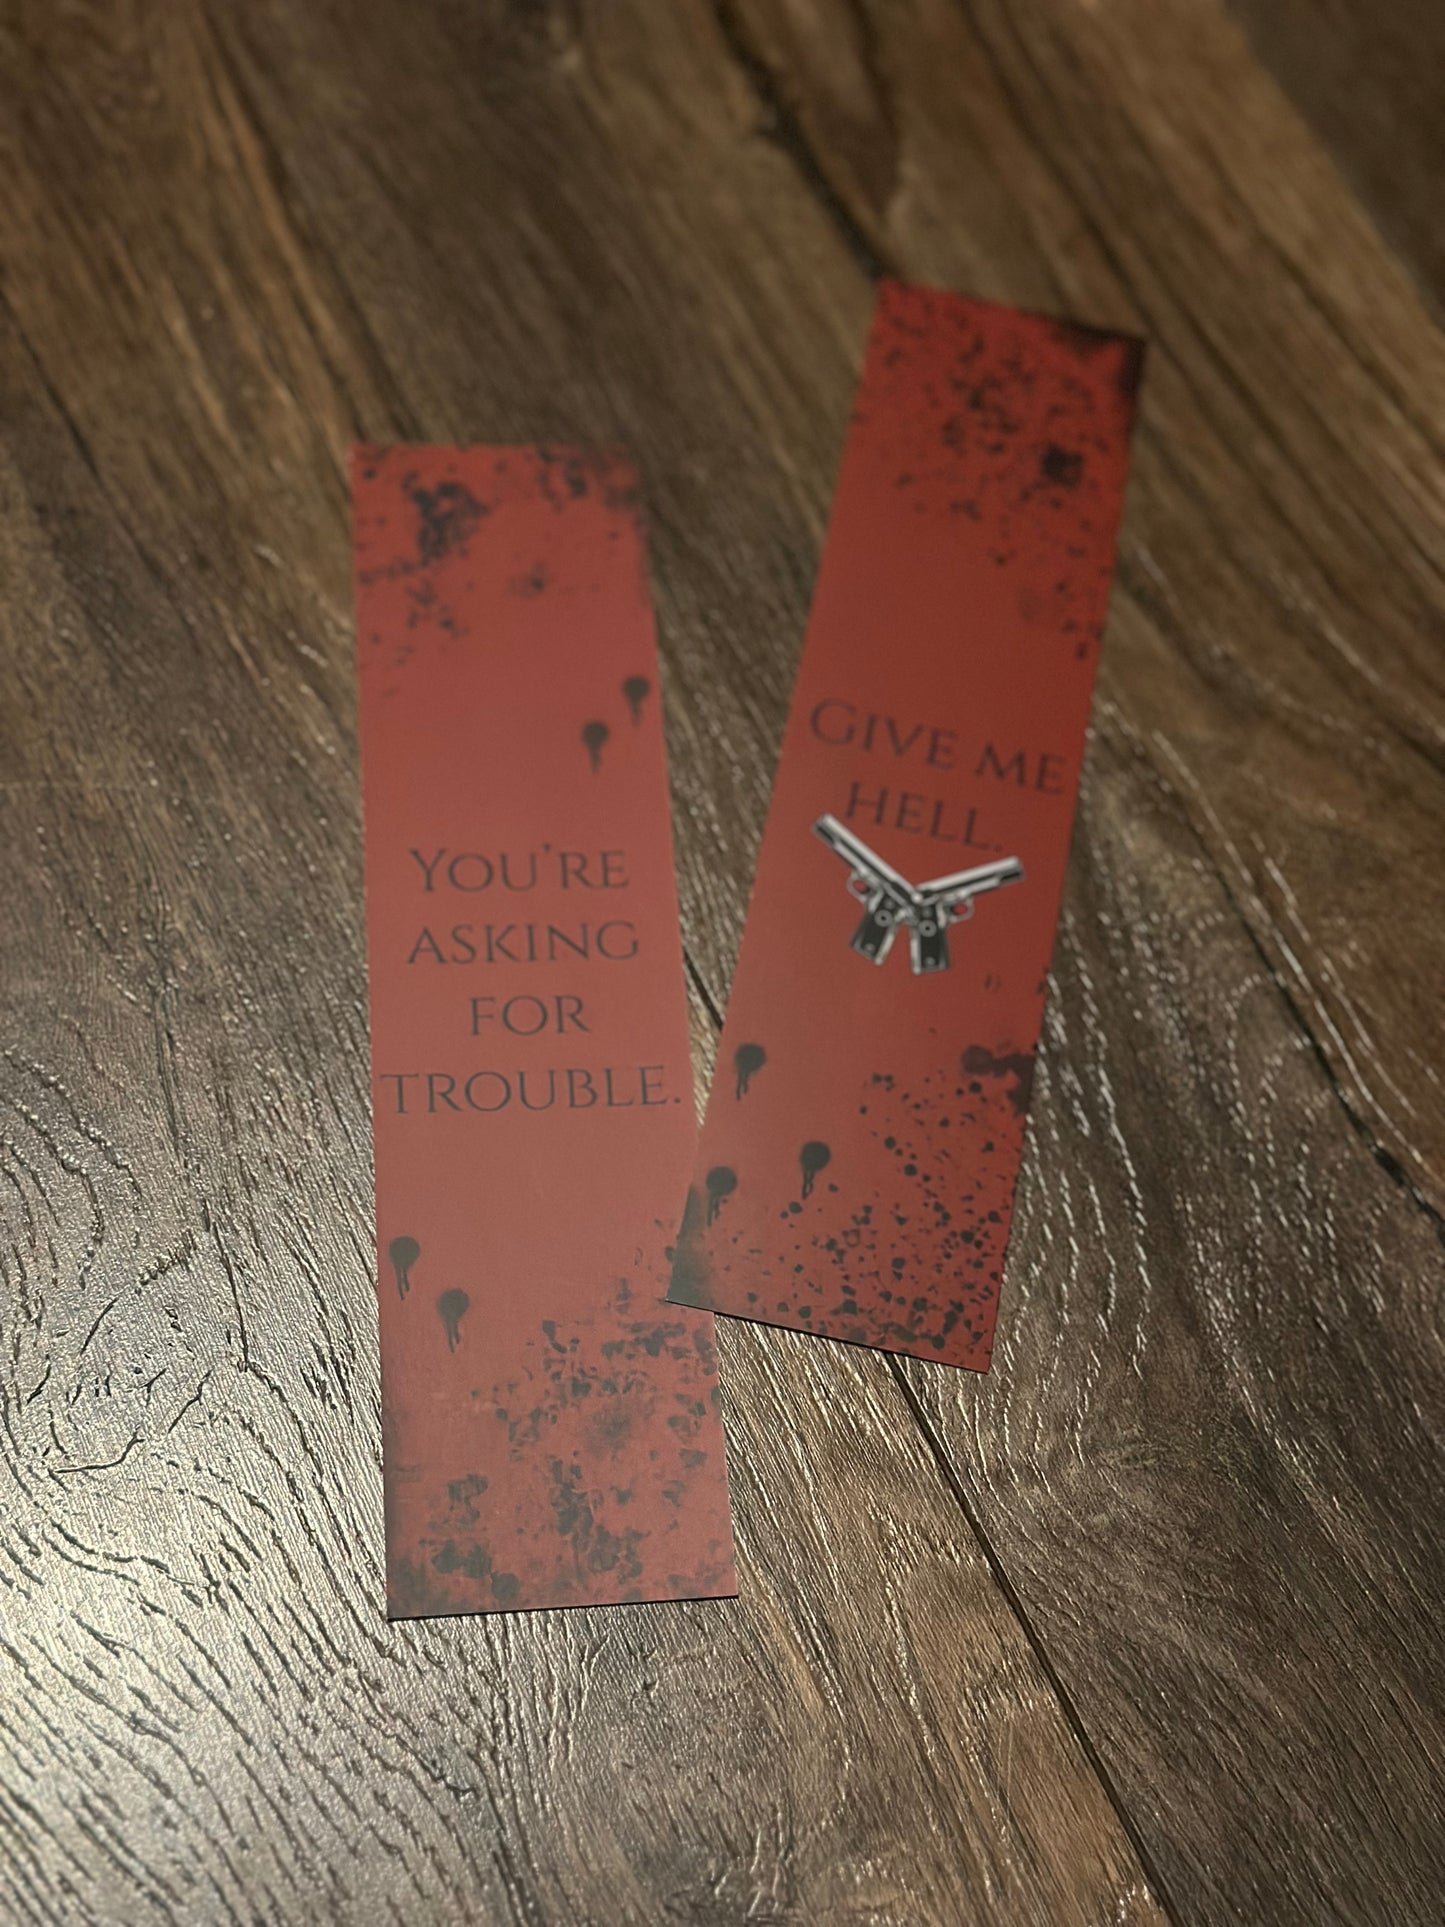 Asking for Trouble/Give me hell Bookmark